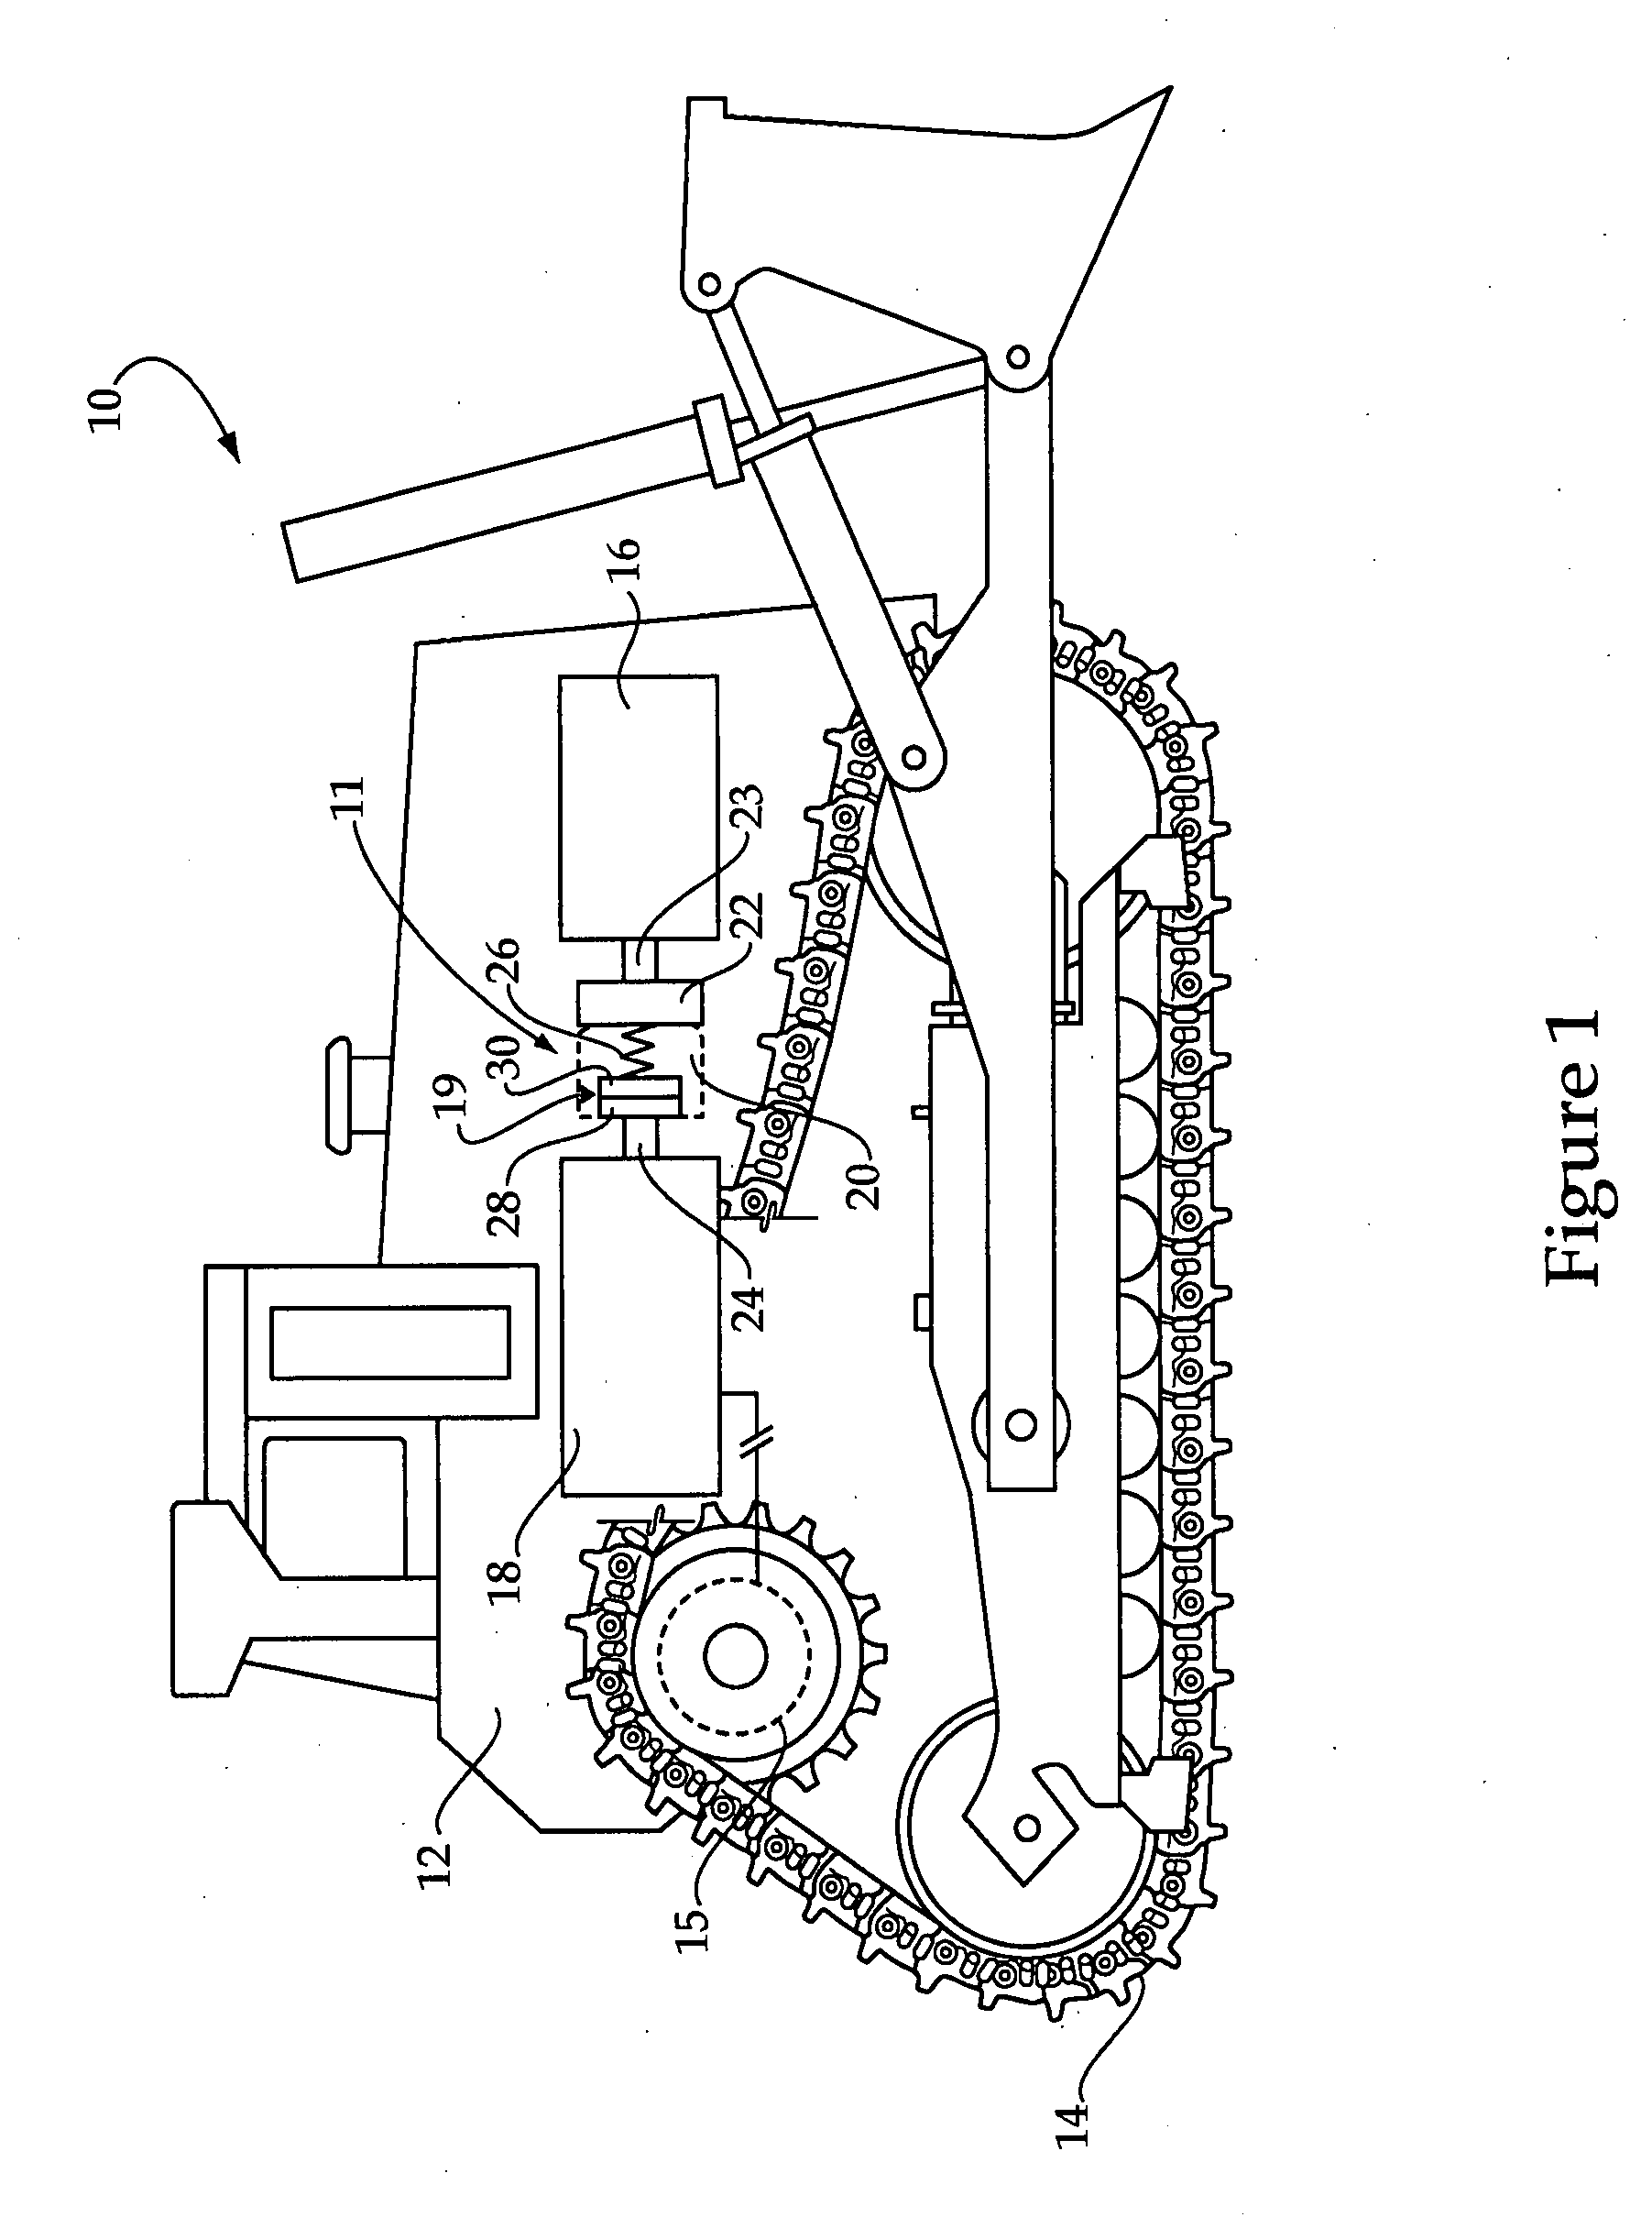 Machine having electrical power system and method